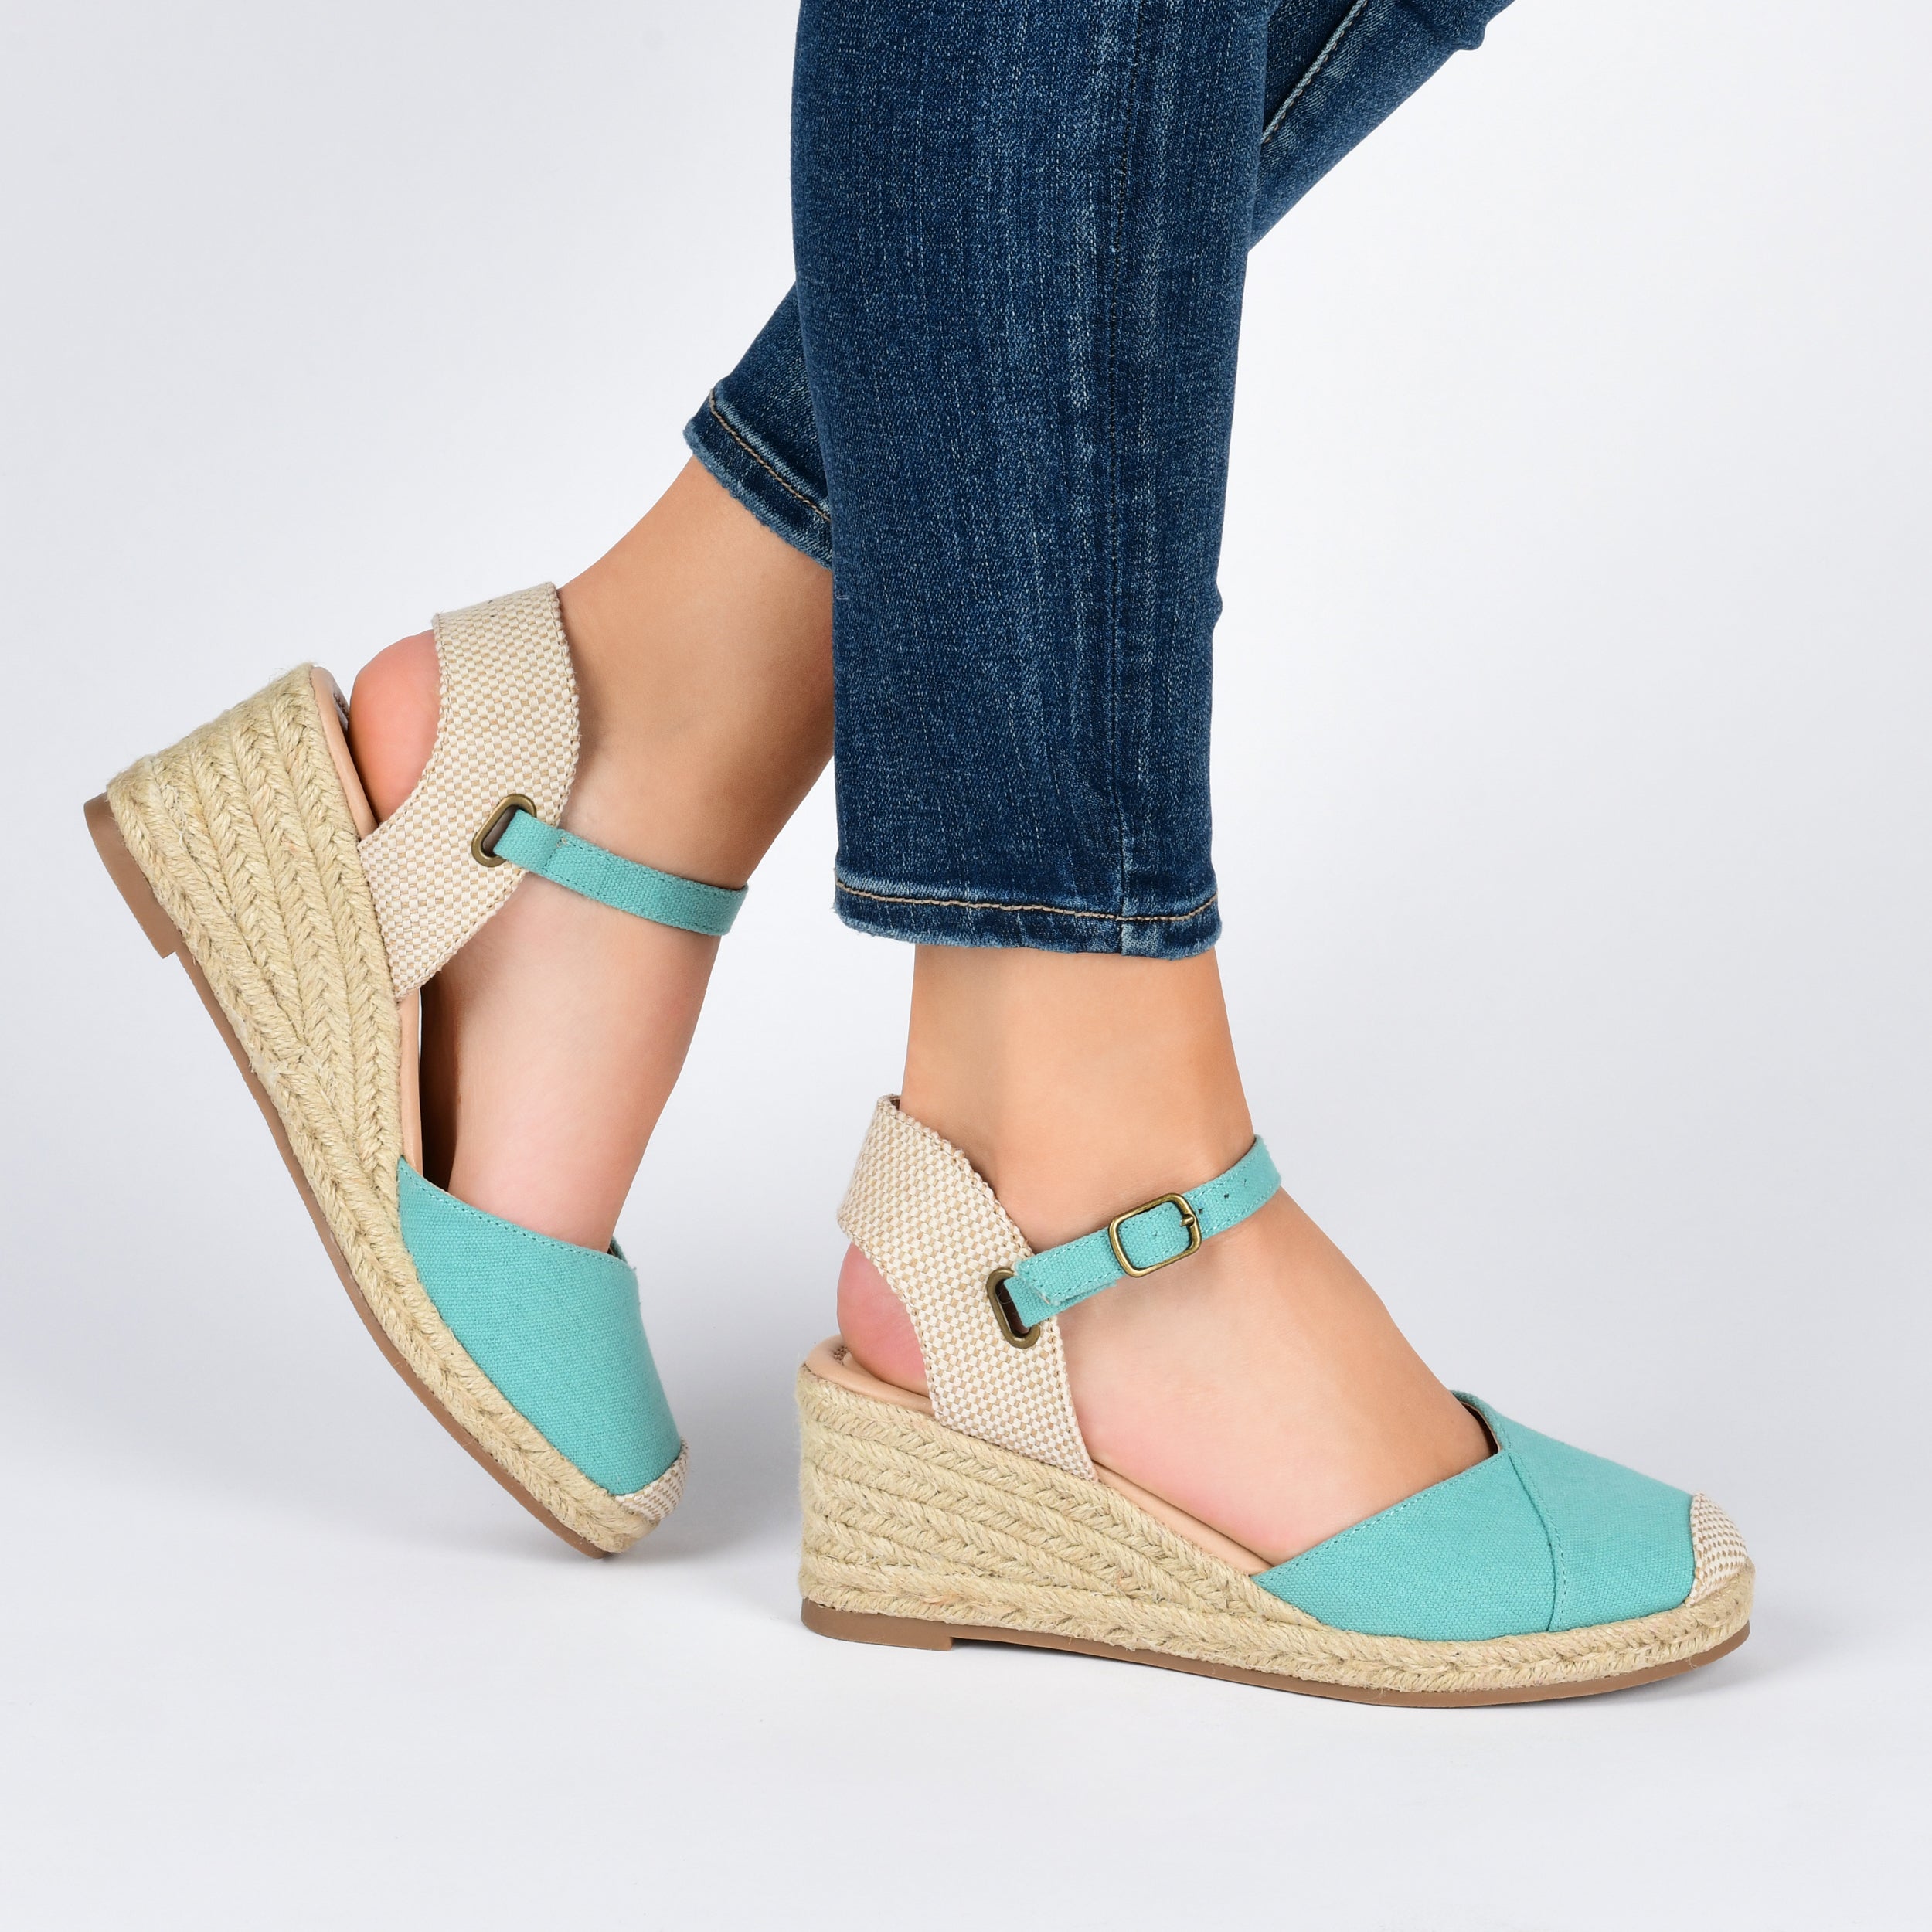 How To Style Fashionable Espadrilles Wedges Outfits in 6 Different Ways -  MY CHIC OBSESSION